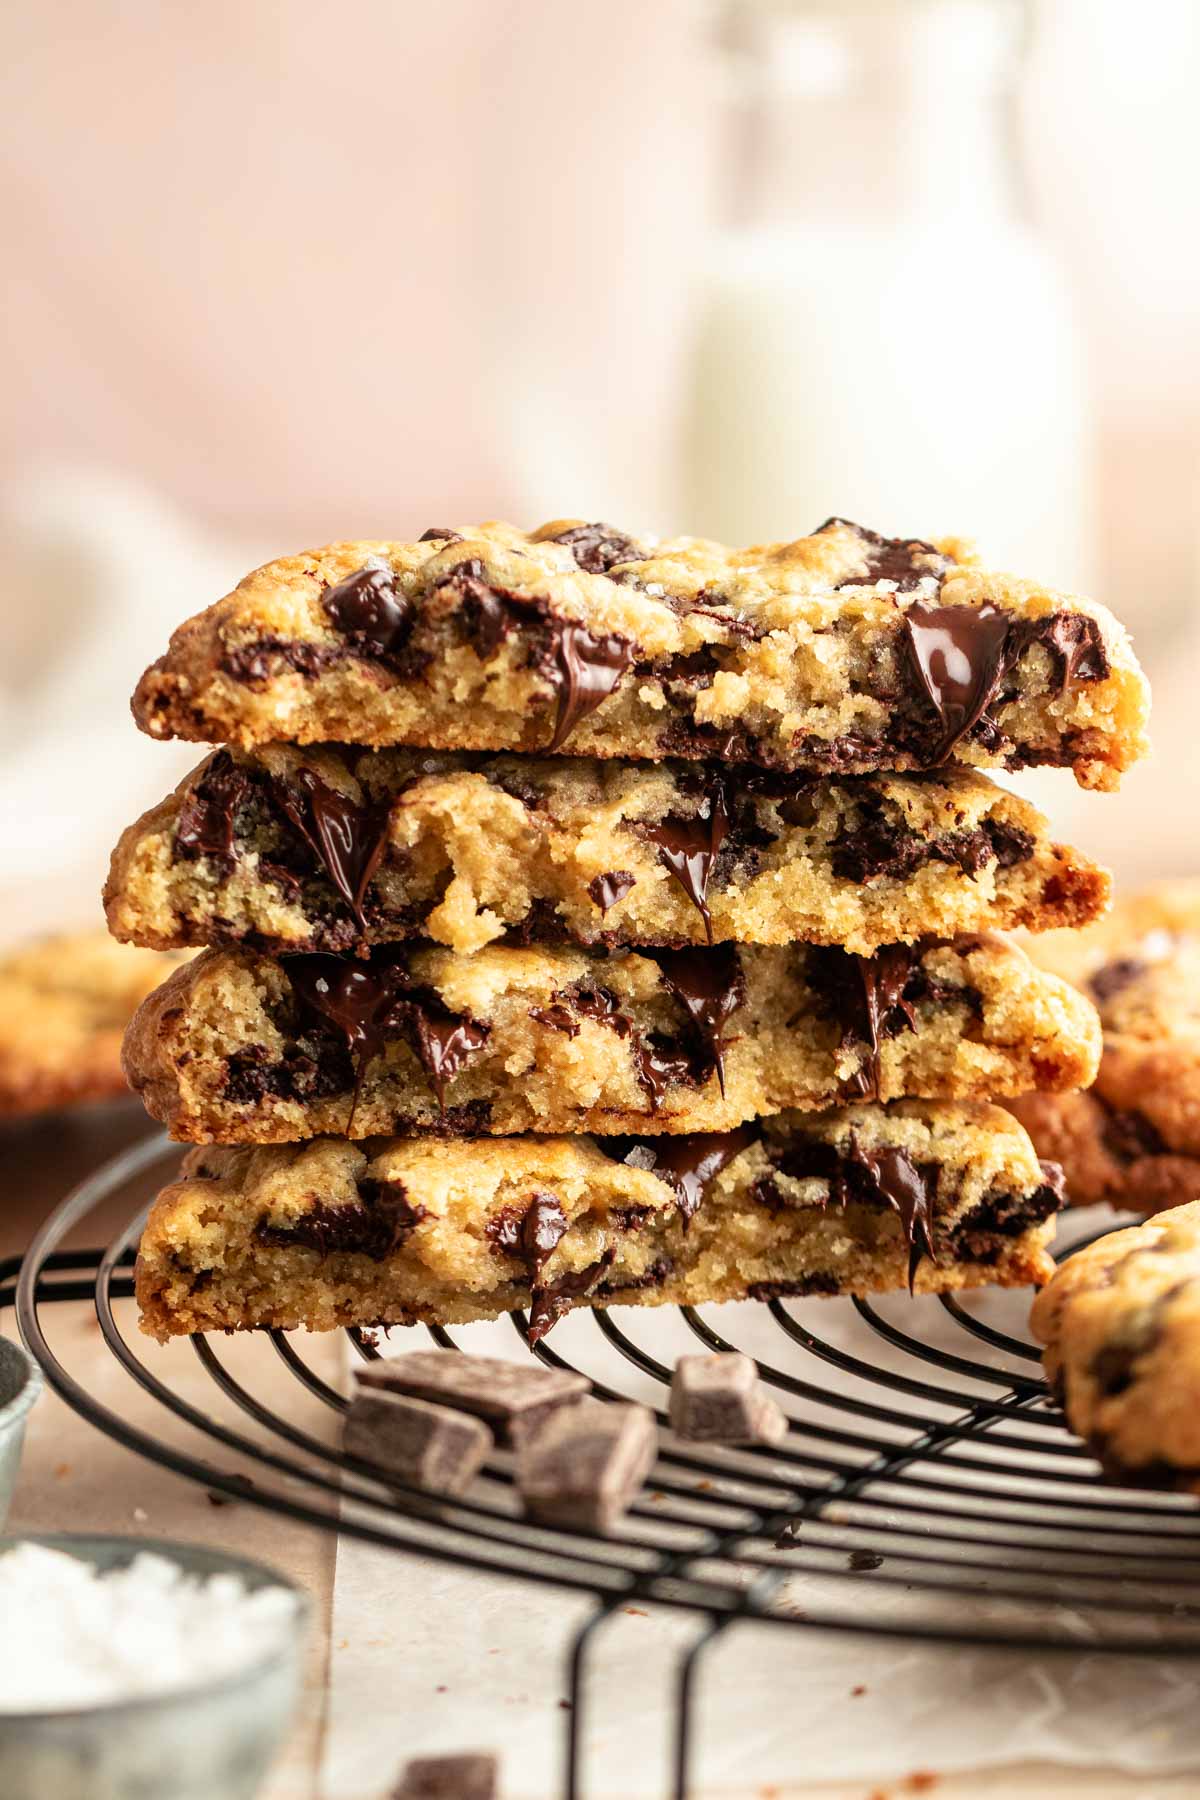 Stack of chocolate chip cookies cut in half.